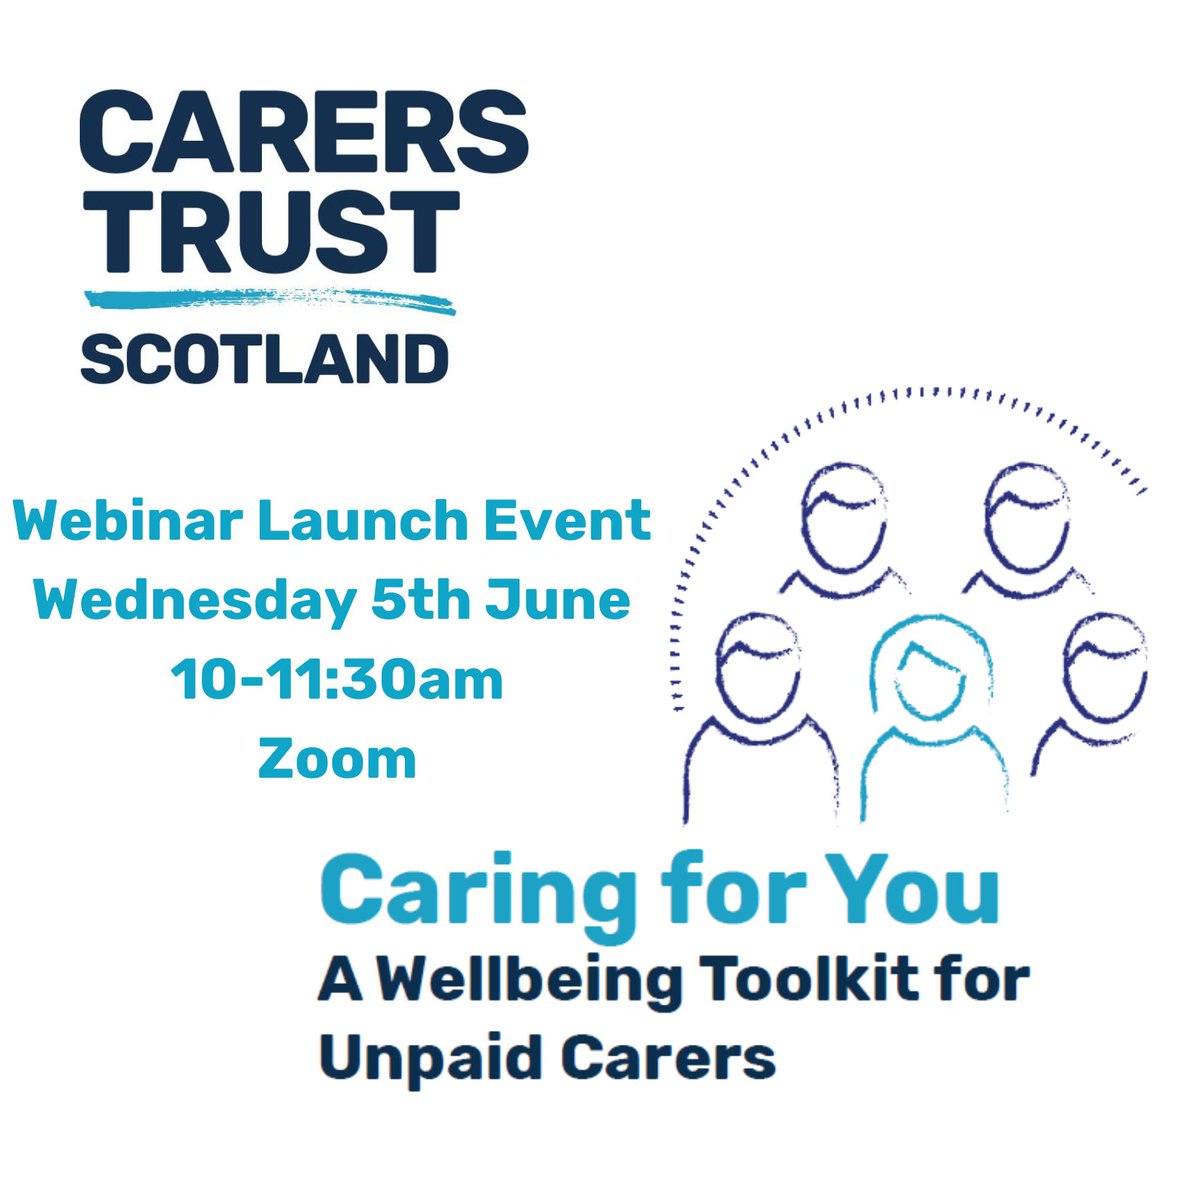 📣 Join us to launch our new resource Caring for You: A Wellbeing Toolkit for Unpaid Carers. We are hosting a webinar on Wednesday 5 June at 10am via Zoom- come along to learn more about this new resource! 👇 To sign up, please see the link below bit.ly/3UGiN4E